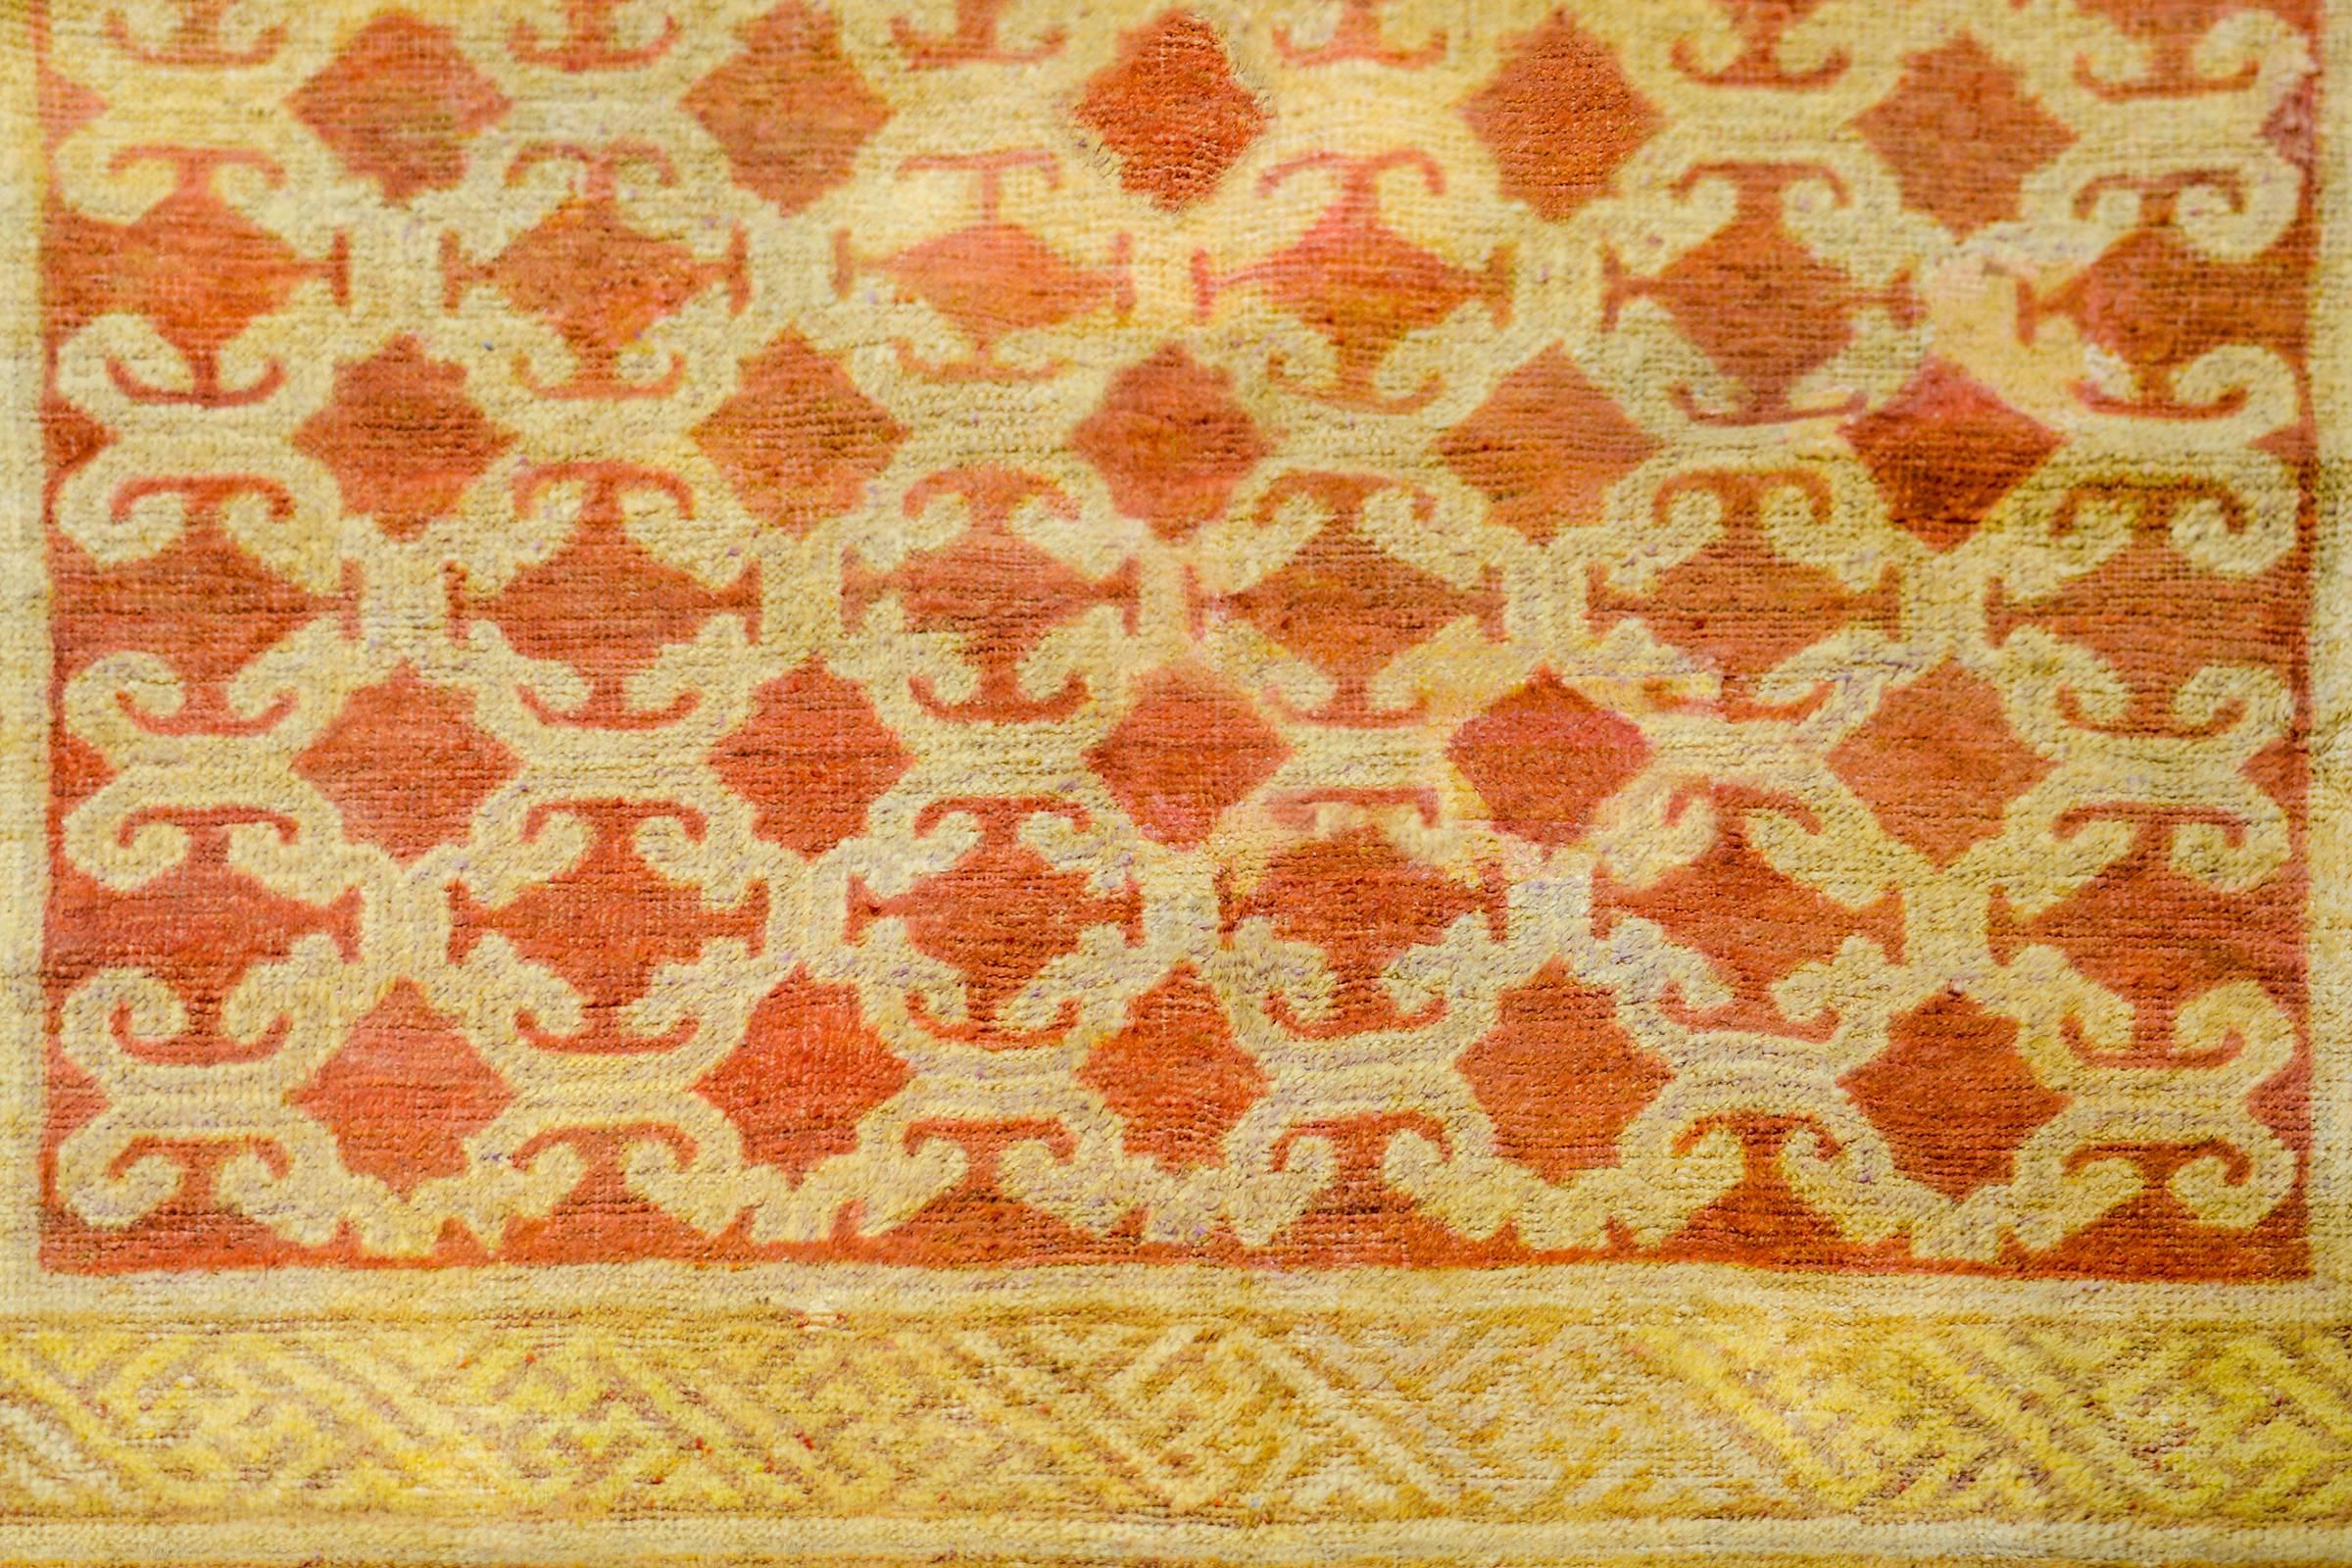 An unusual early 20th century Central Asian Khotan rug with a knotted lattice pattern woven in a cream colored wool on a burnt orange background. The border in composed with two patterns, the inner stripe being a Buddhist meandering motif, and the